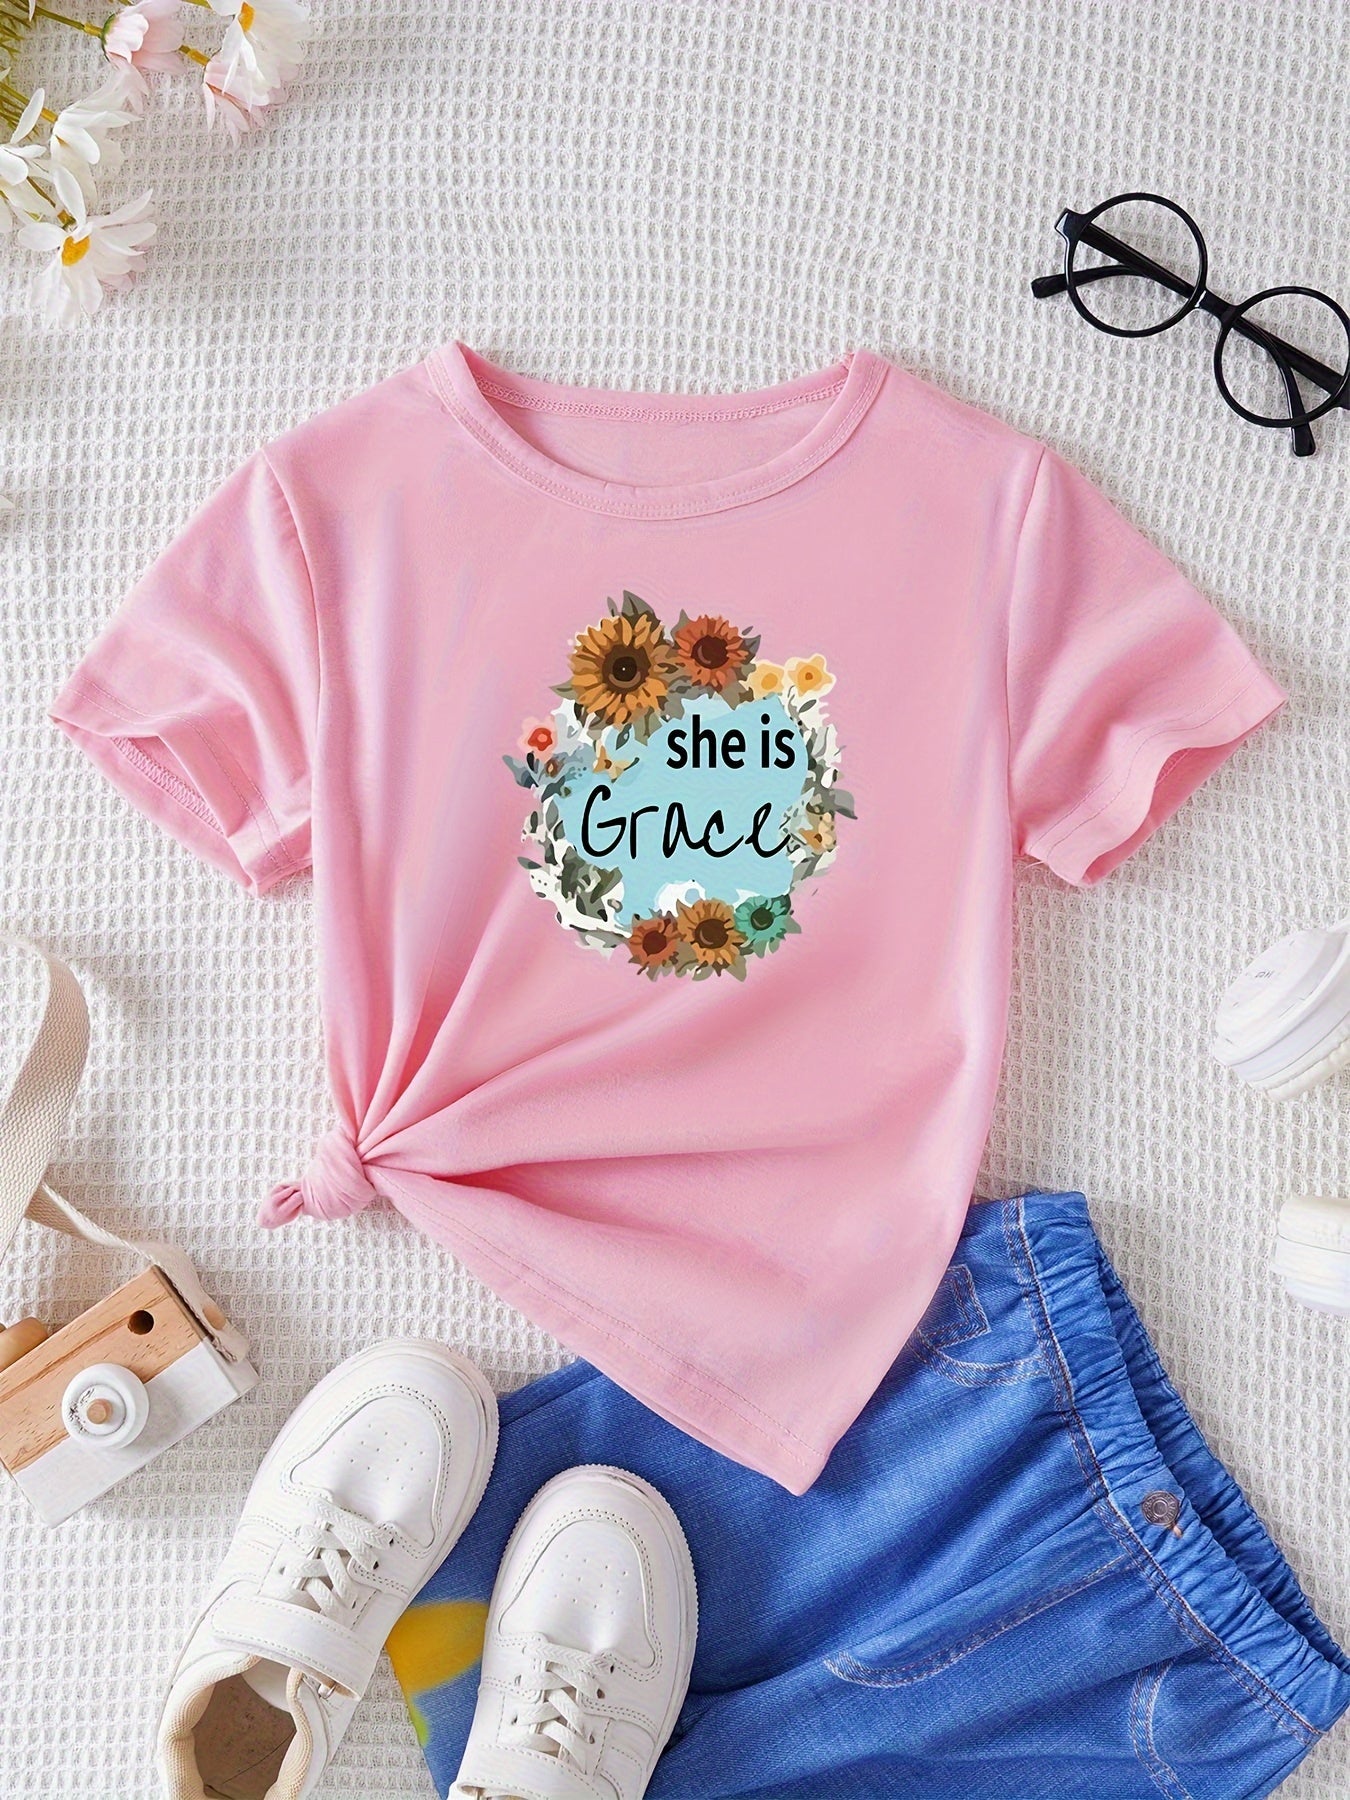 SHE IS GRACE Youth Christian T-shirt claimedbygoddesigns